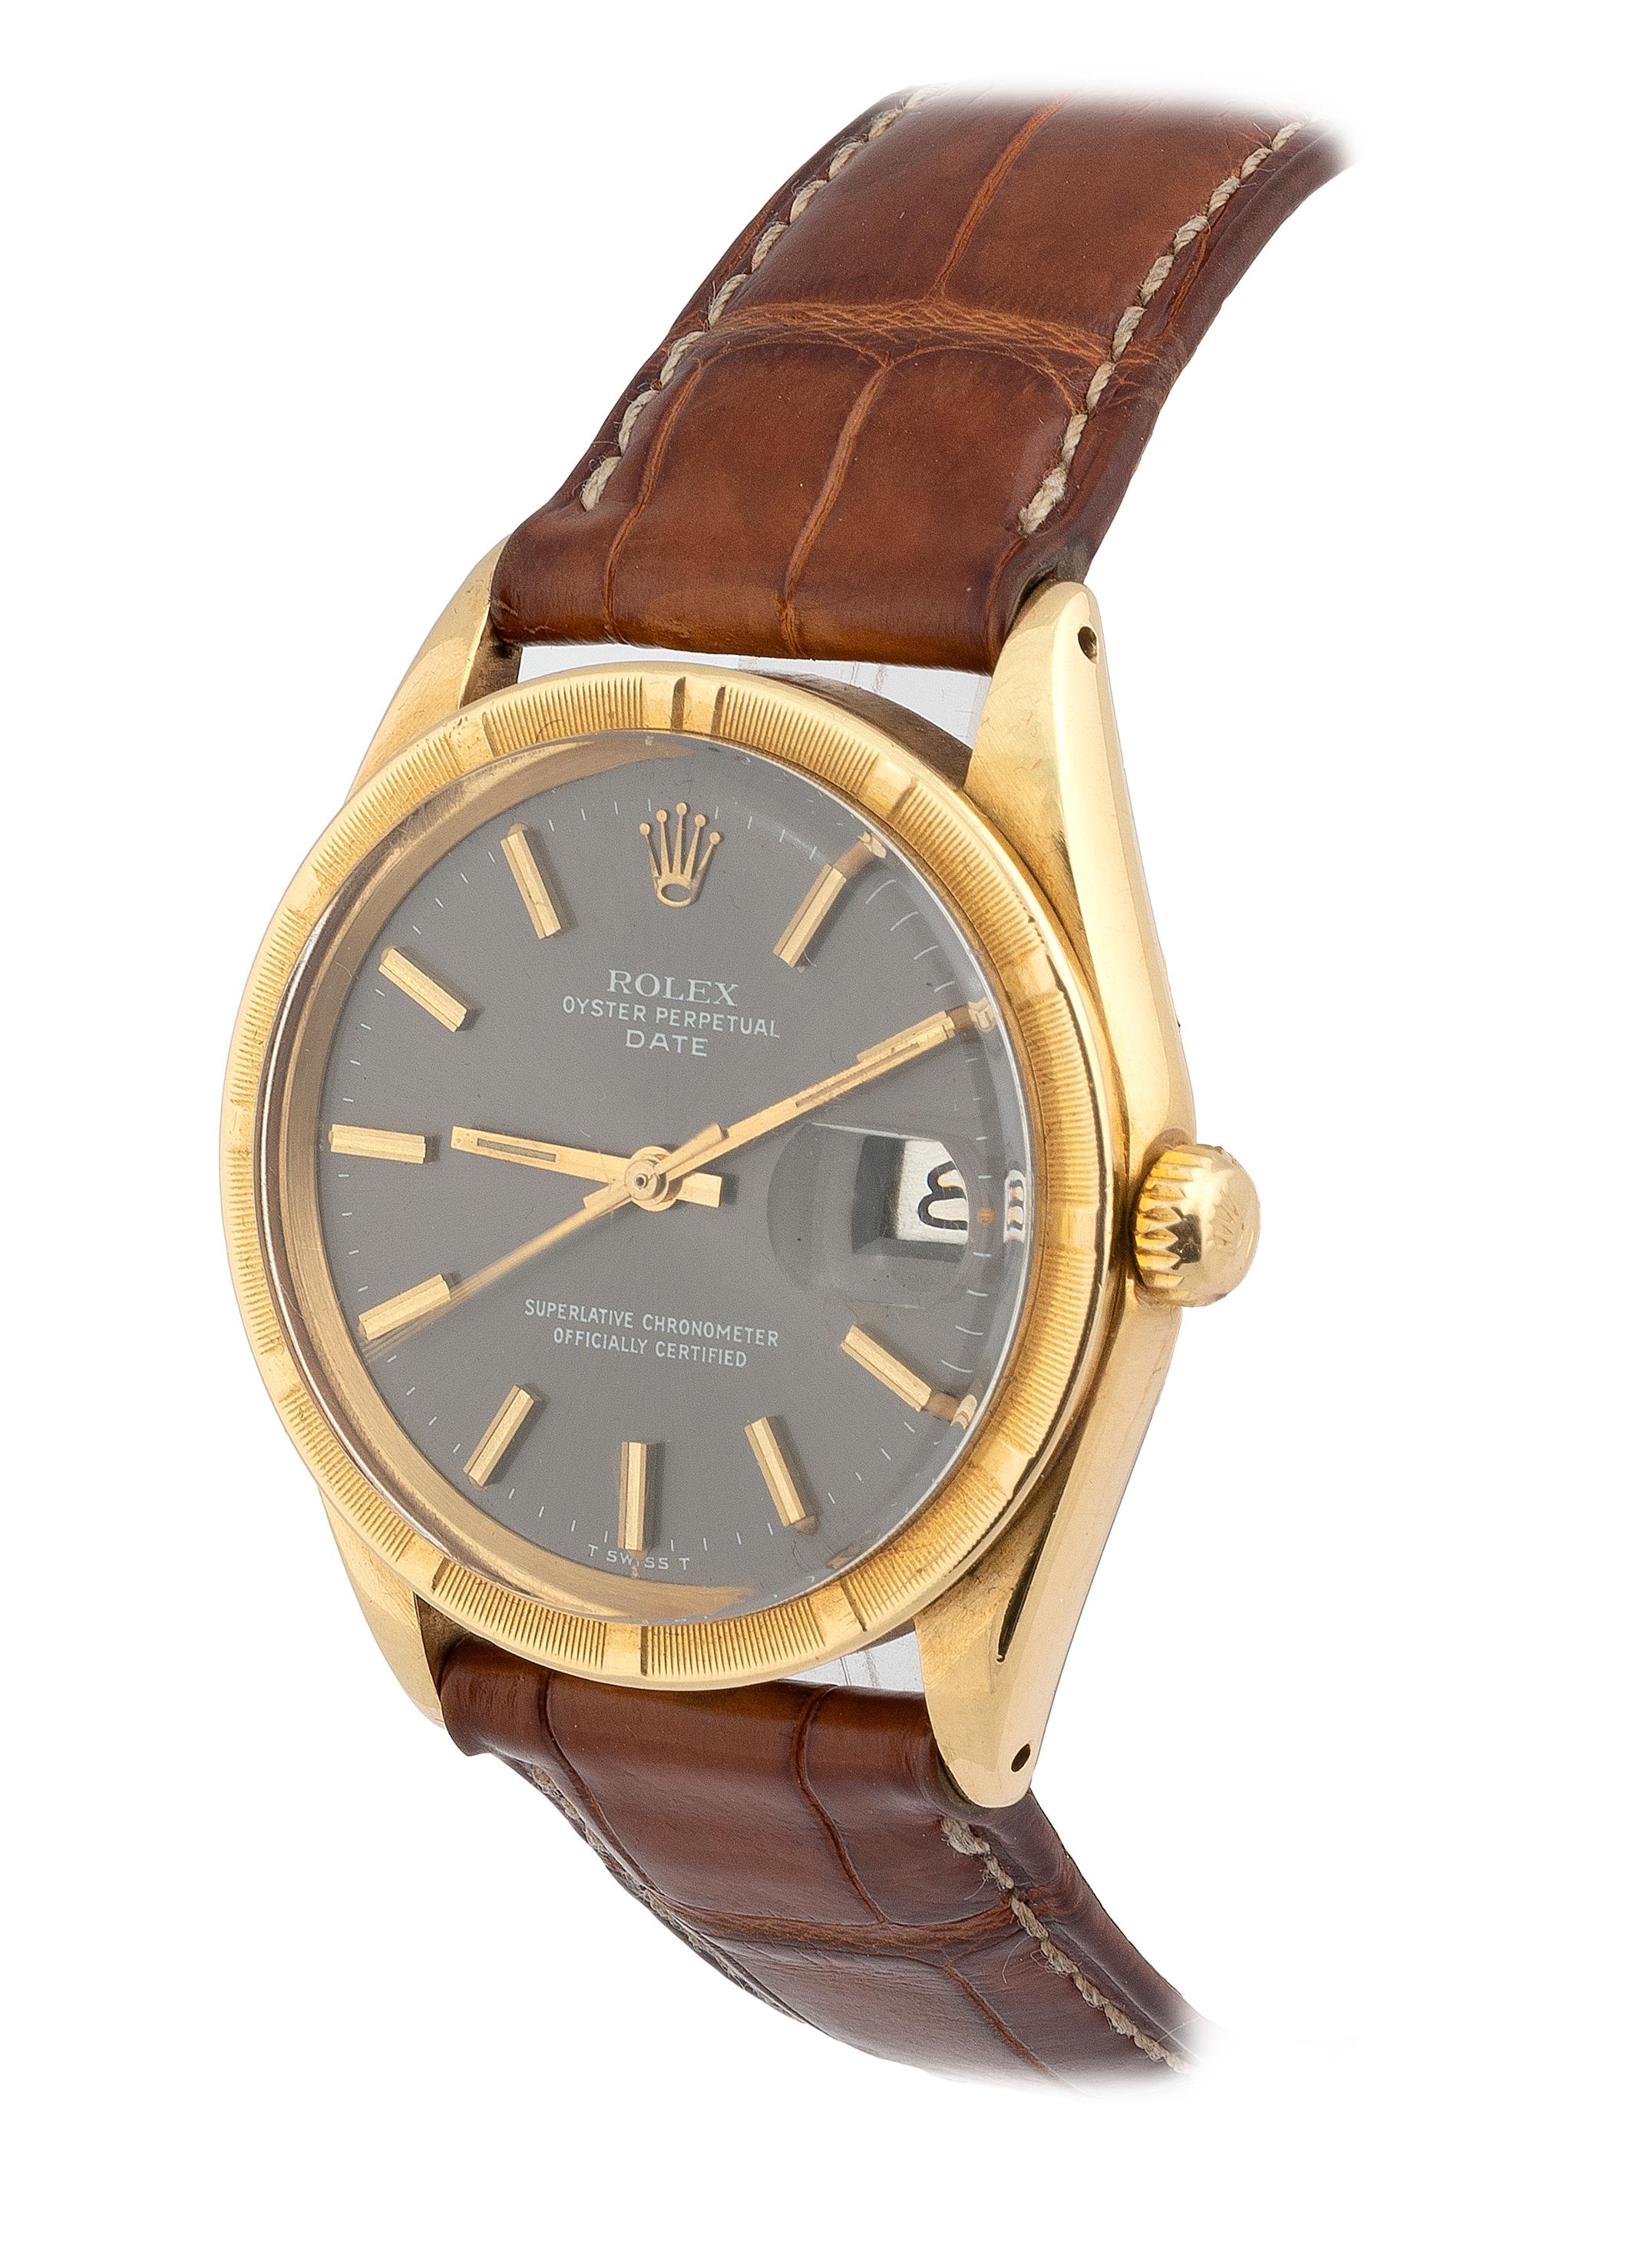 Oyster Perpetual, Date, Superlative Chronometer, Officially Certified, Ref. 1501. Made in 1970's. Fine, center seconds, self-winding, 18K yellow gold Chronometer wristwatch with date with an 18k Rolex deployant clasp. DIAM. 34 mm. THICKNESS 12 mm.